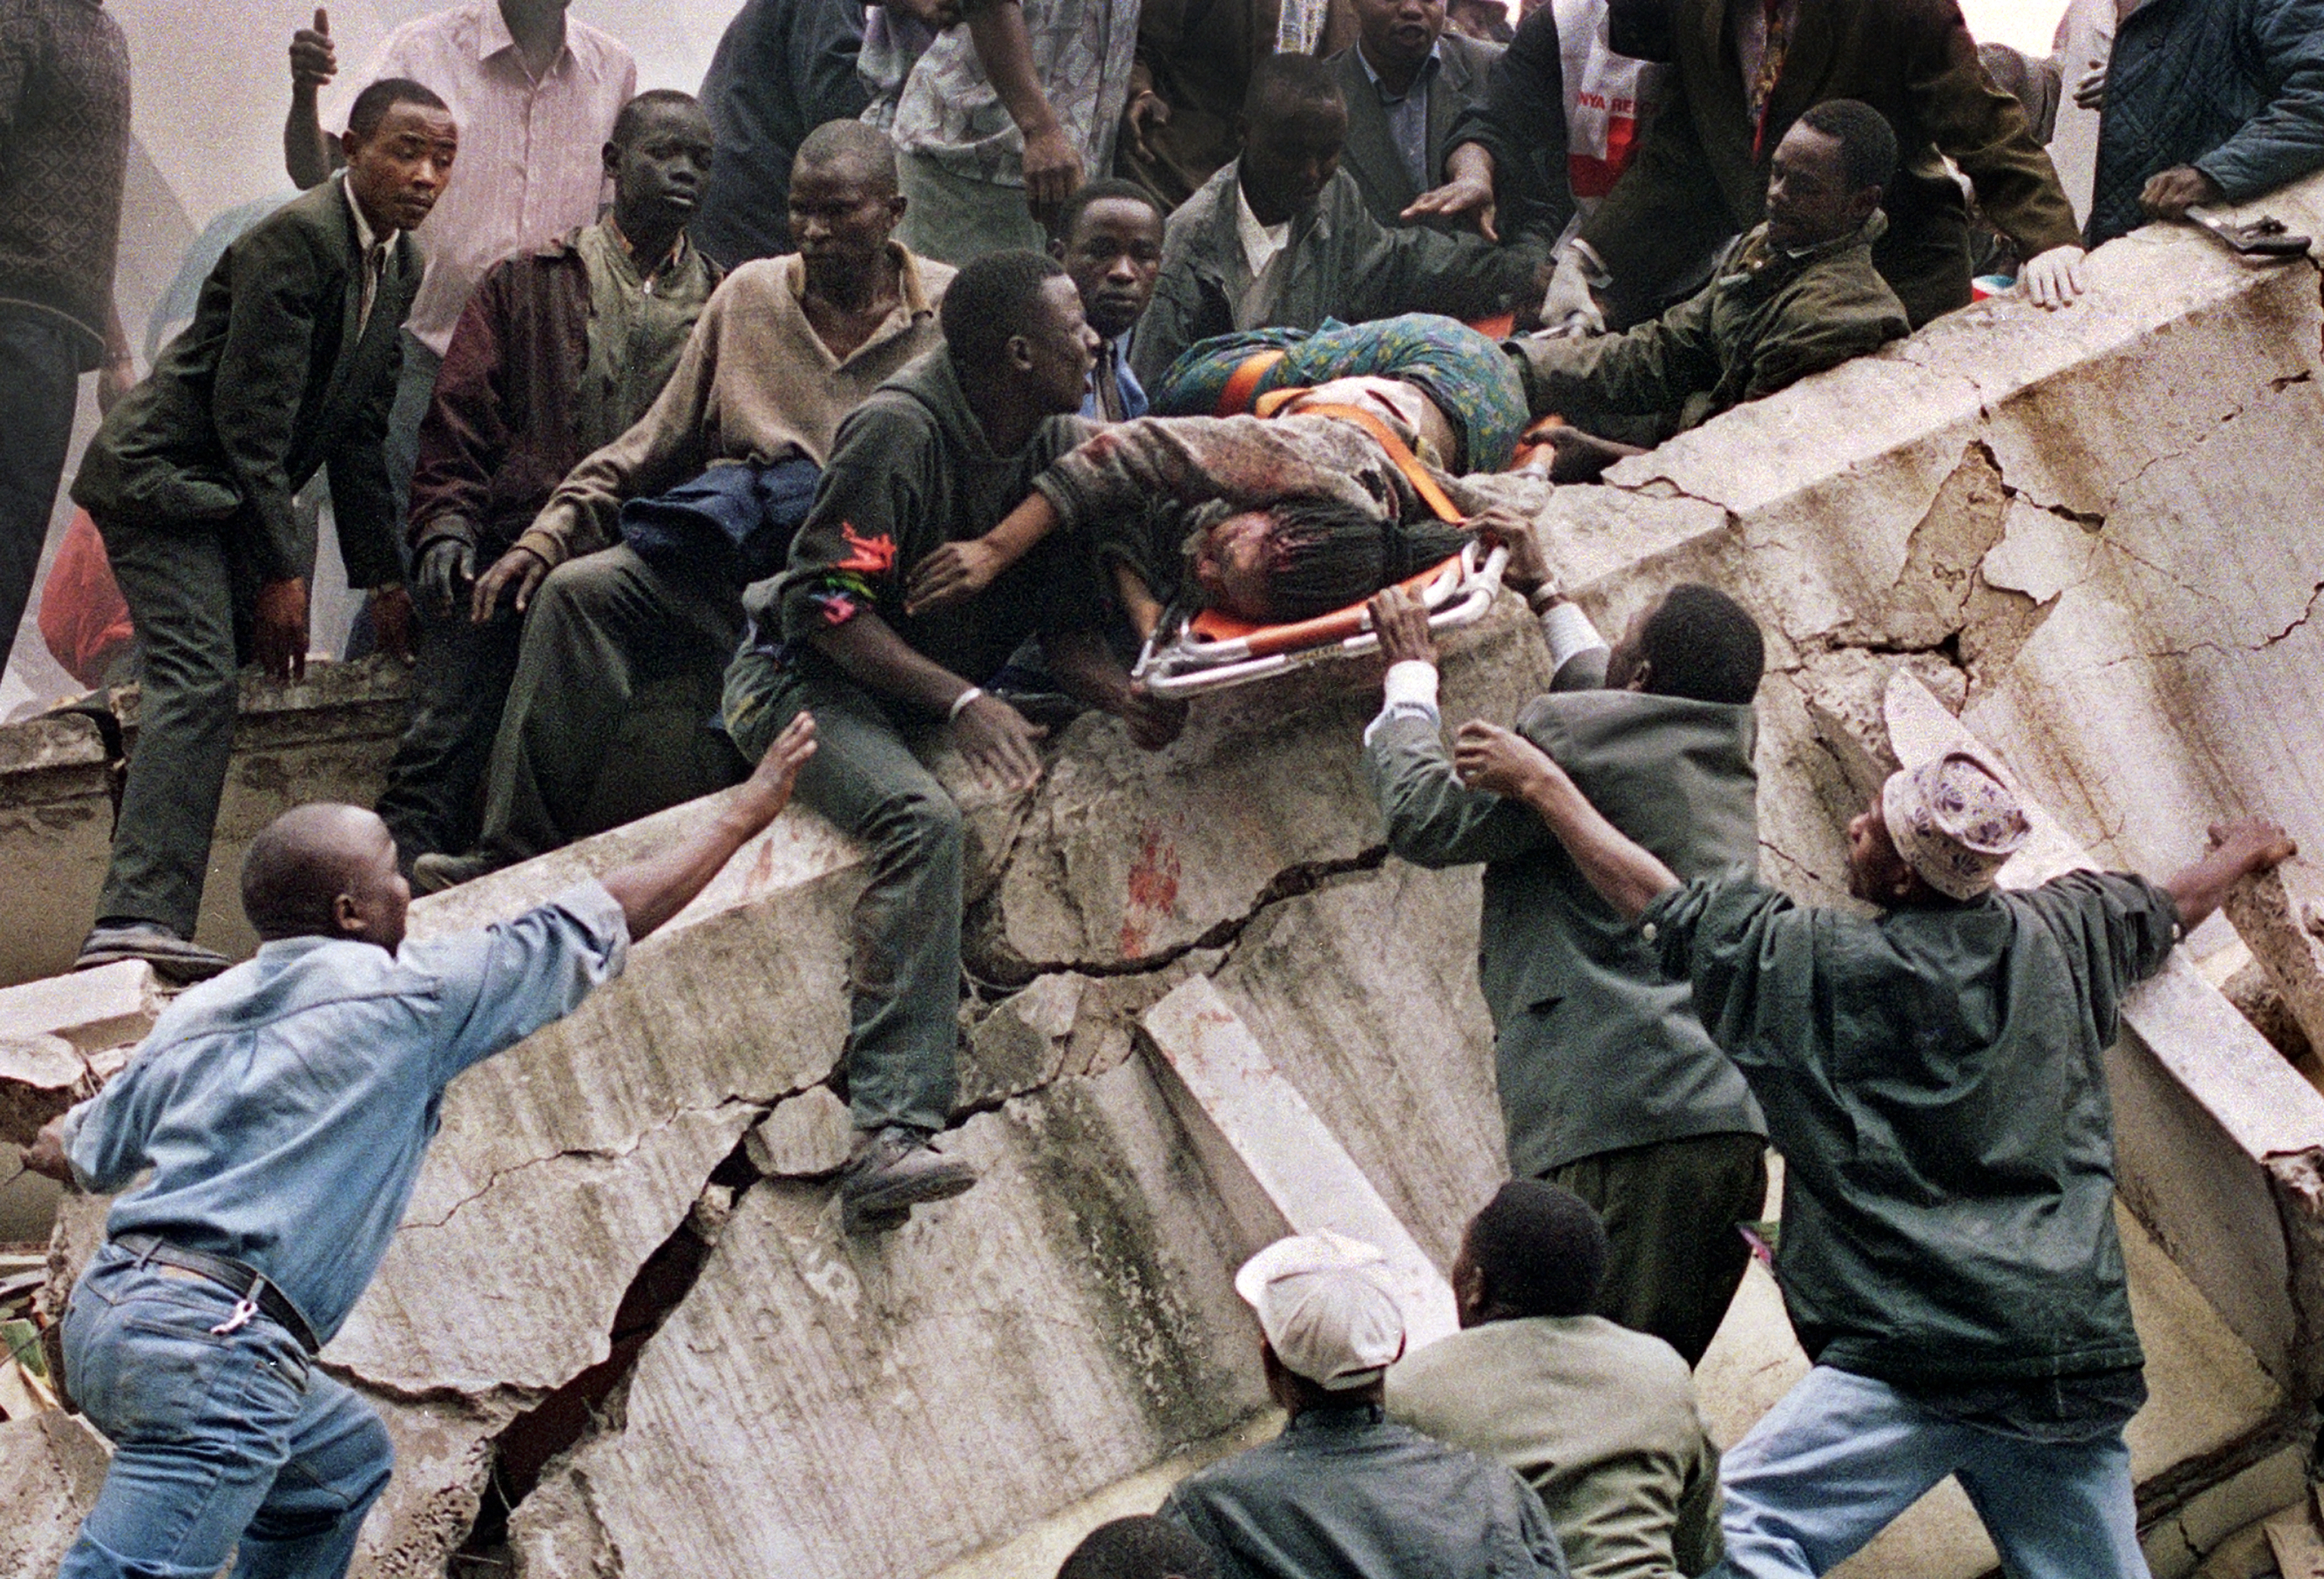 Rescue workers carry Susan Francisca Murianki, a U.S. Embassy office worker, from the rubble of a collapsed building in next to the embassy in Nairobi on Aug. 7, 1998 after terrorist bombs exploded minutes apart outside the U.S. embassies in the Kenyan and Tanzanian capitals. In Nairobi alone more than 200 people were killed and about 4,000 wounded. (AP Photo/Khalil Senosi)